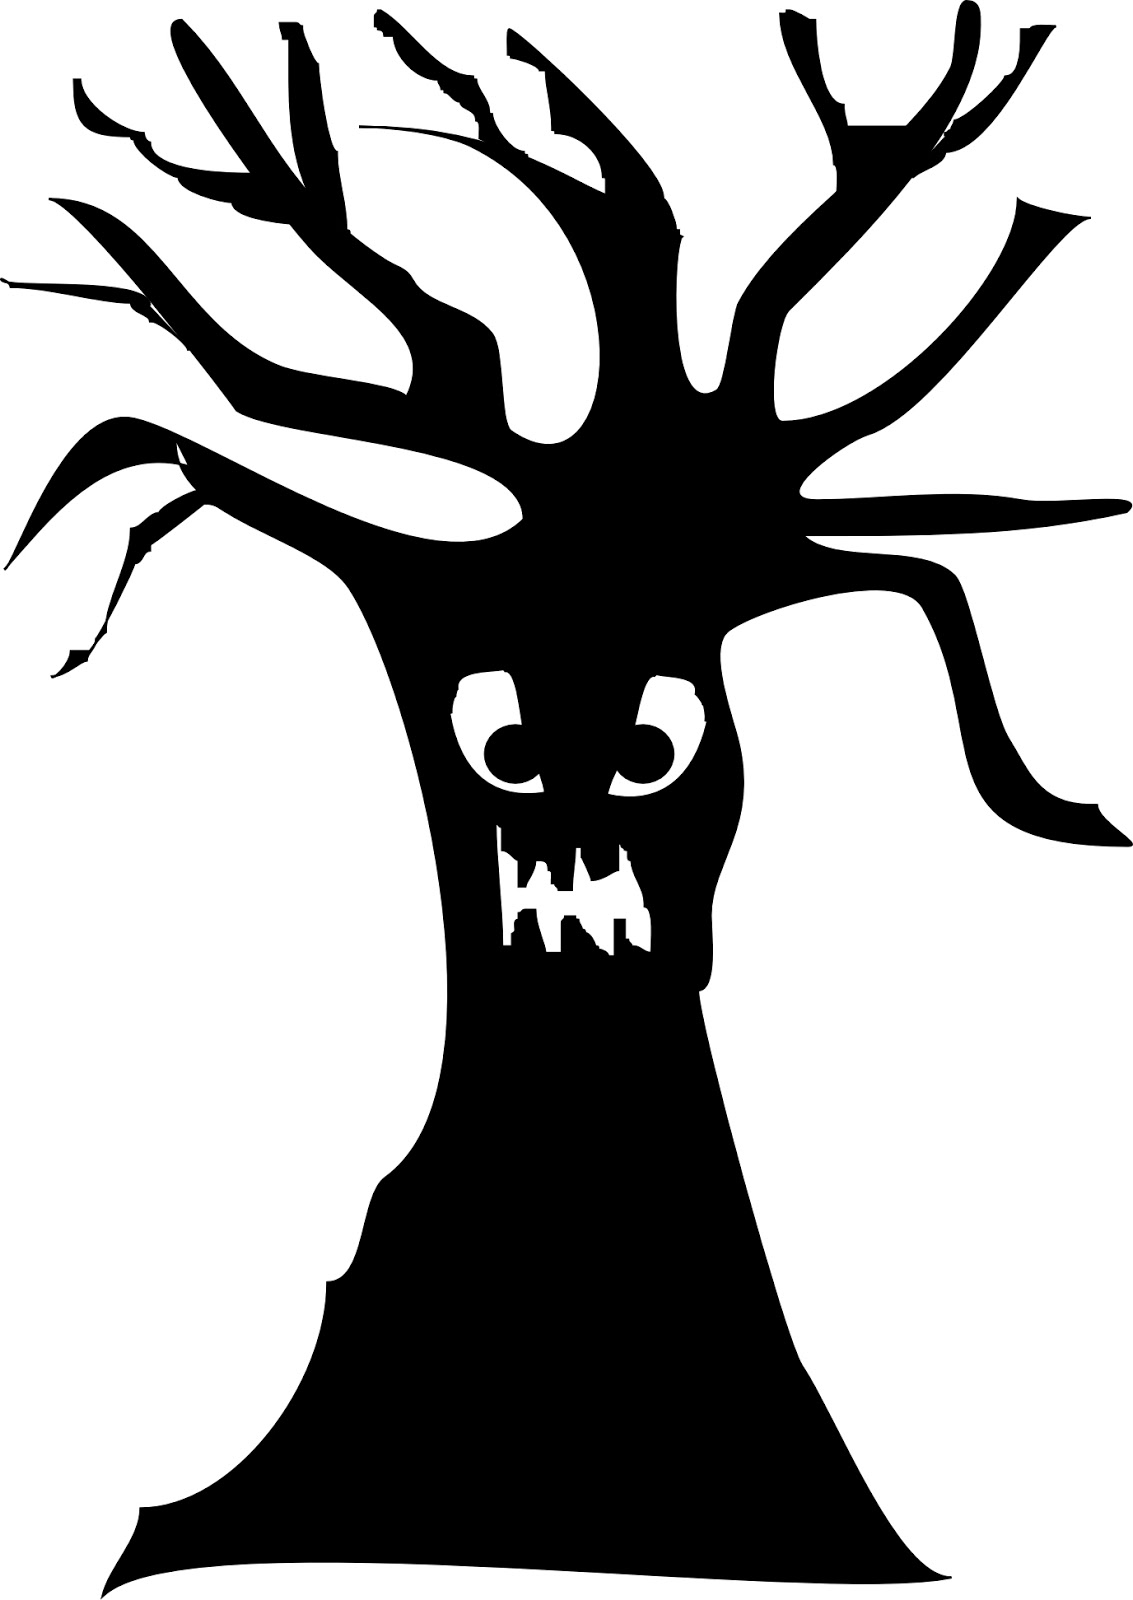 Halloween Spooky Tree Silhouette Images & Pictures - Becuo